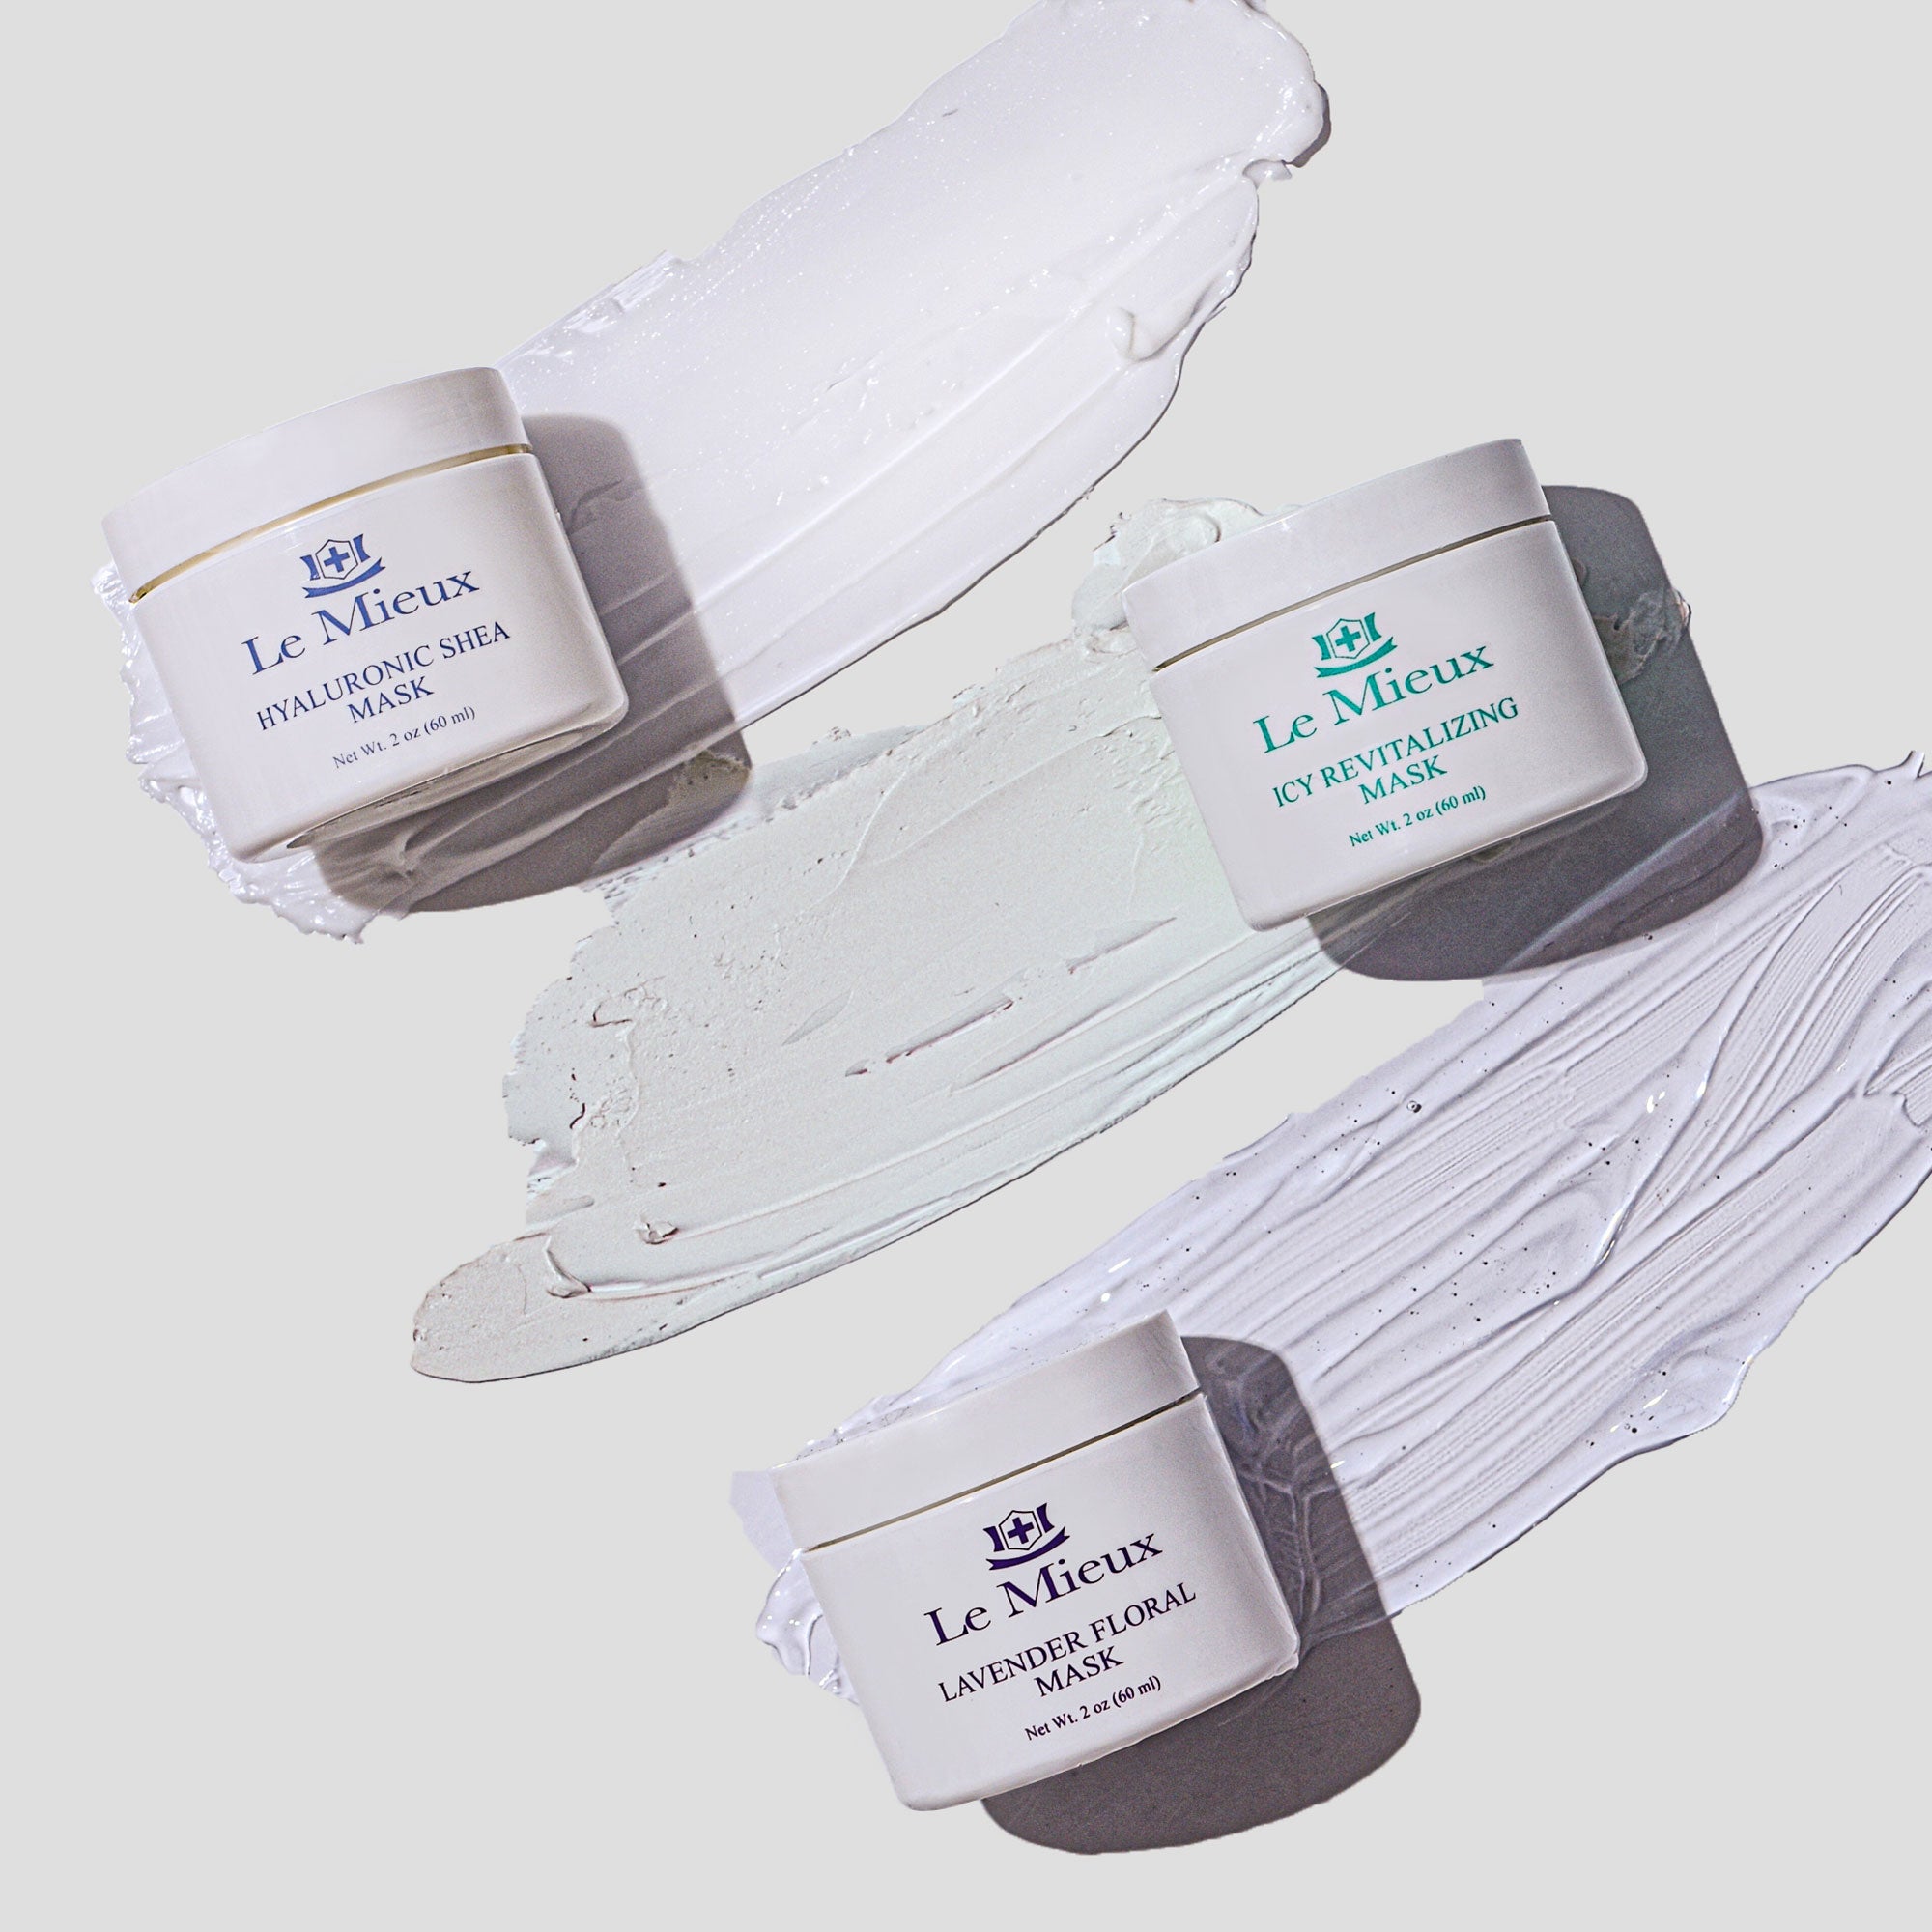  HYALURONIC SHEA MASK from Le Mieux Skincare - 4